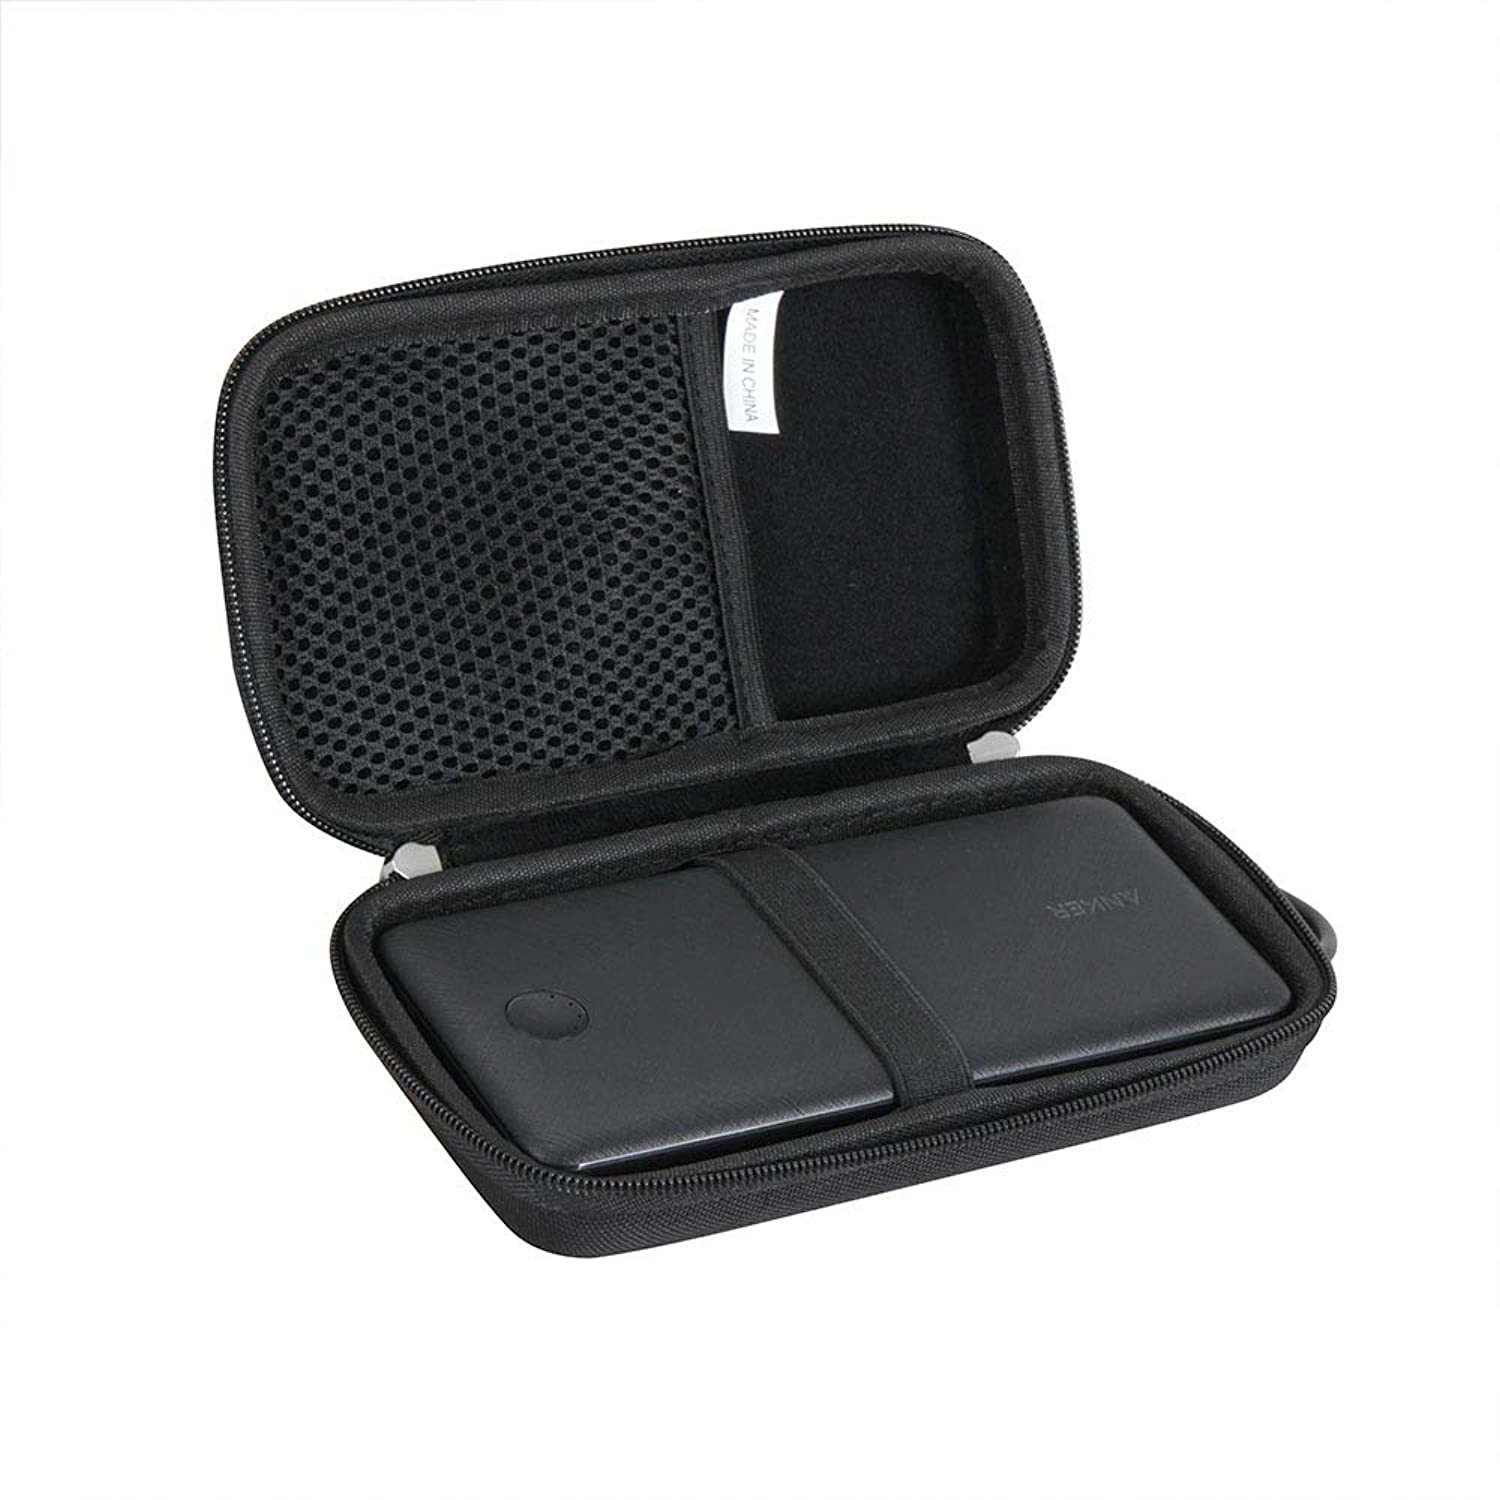 Hermit Hard Case For Anker Powercore Essential 20000 / Anker Powercore - $27.15